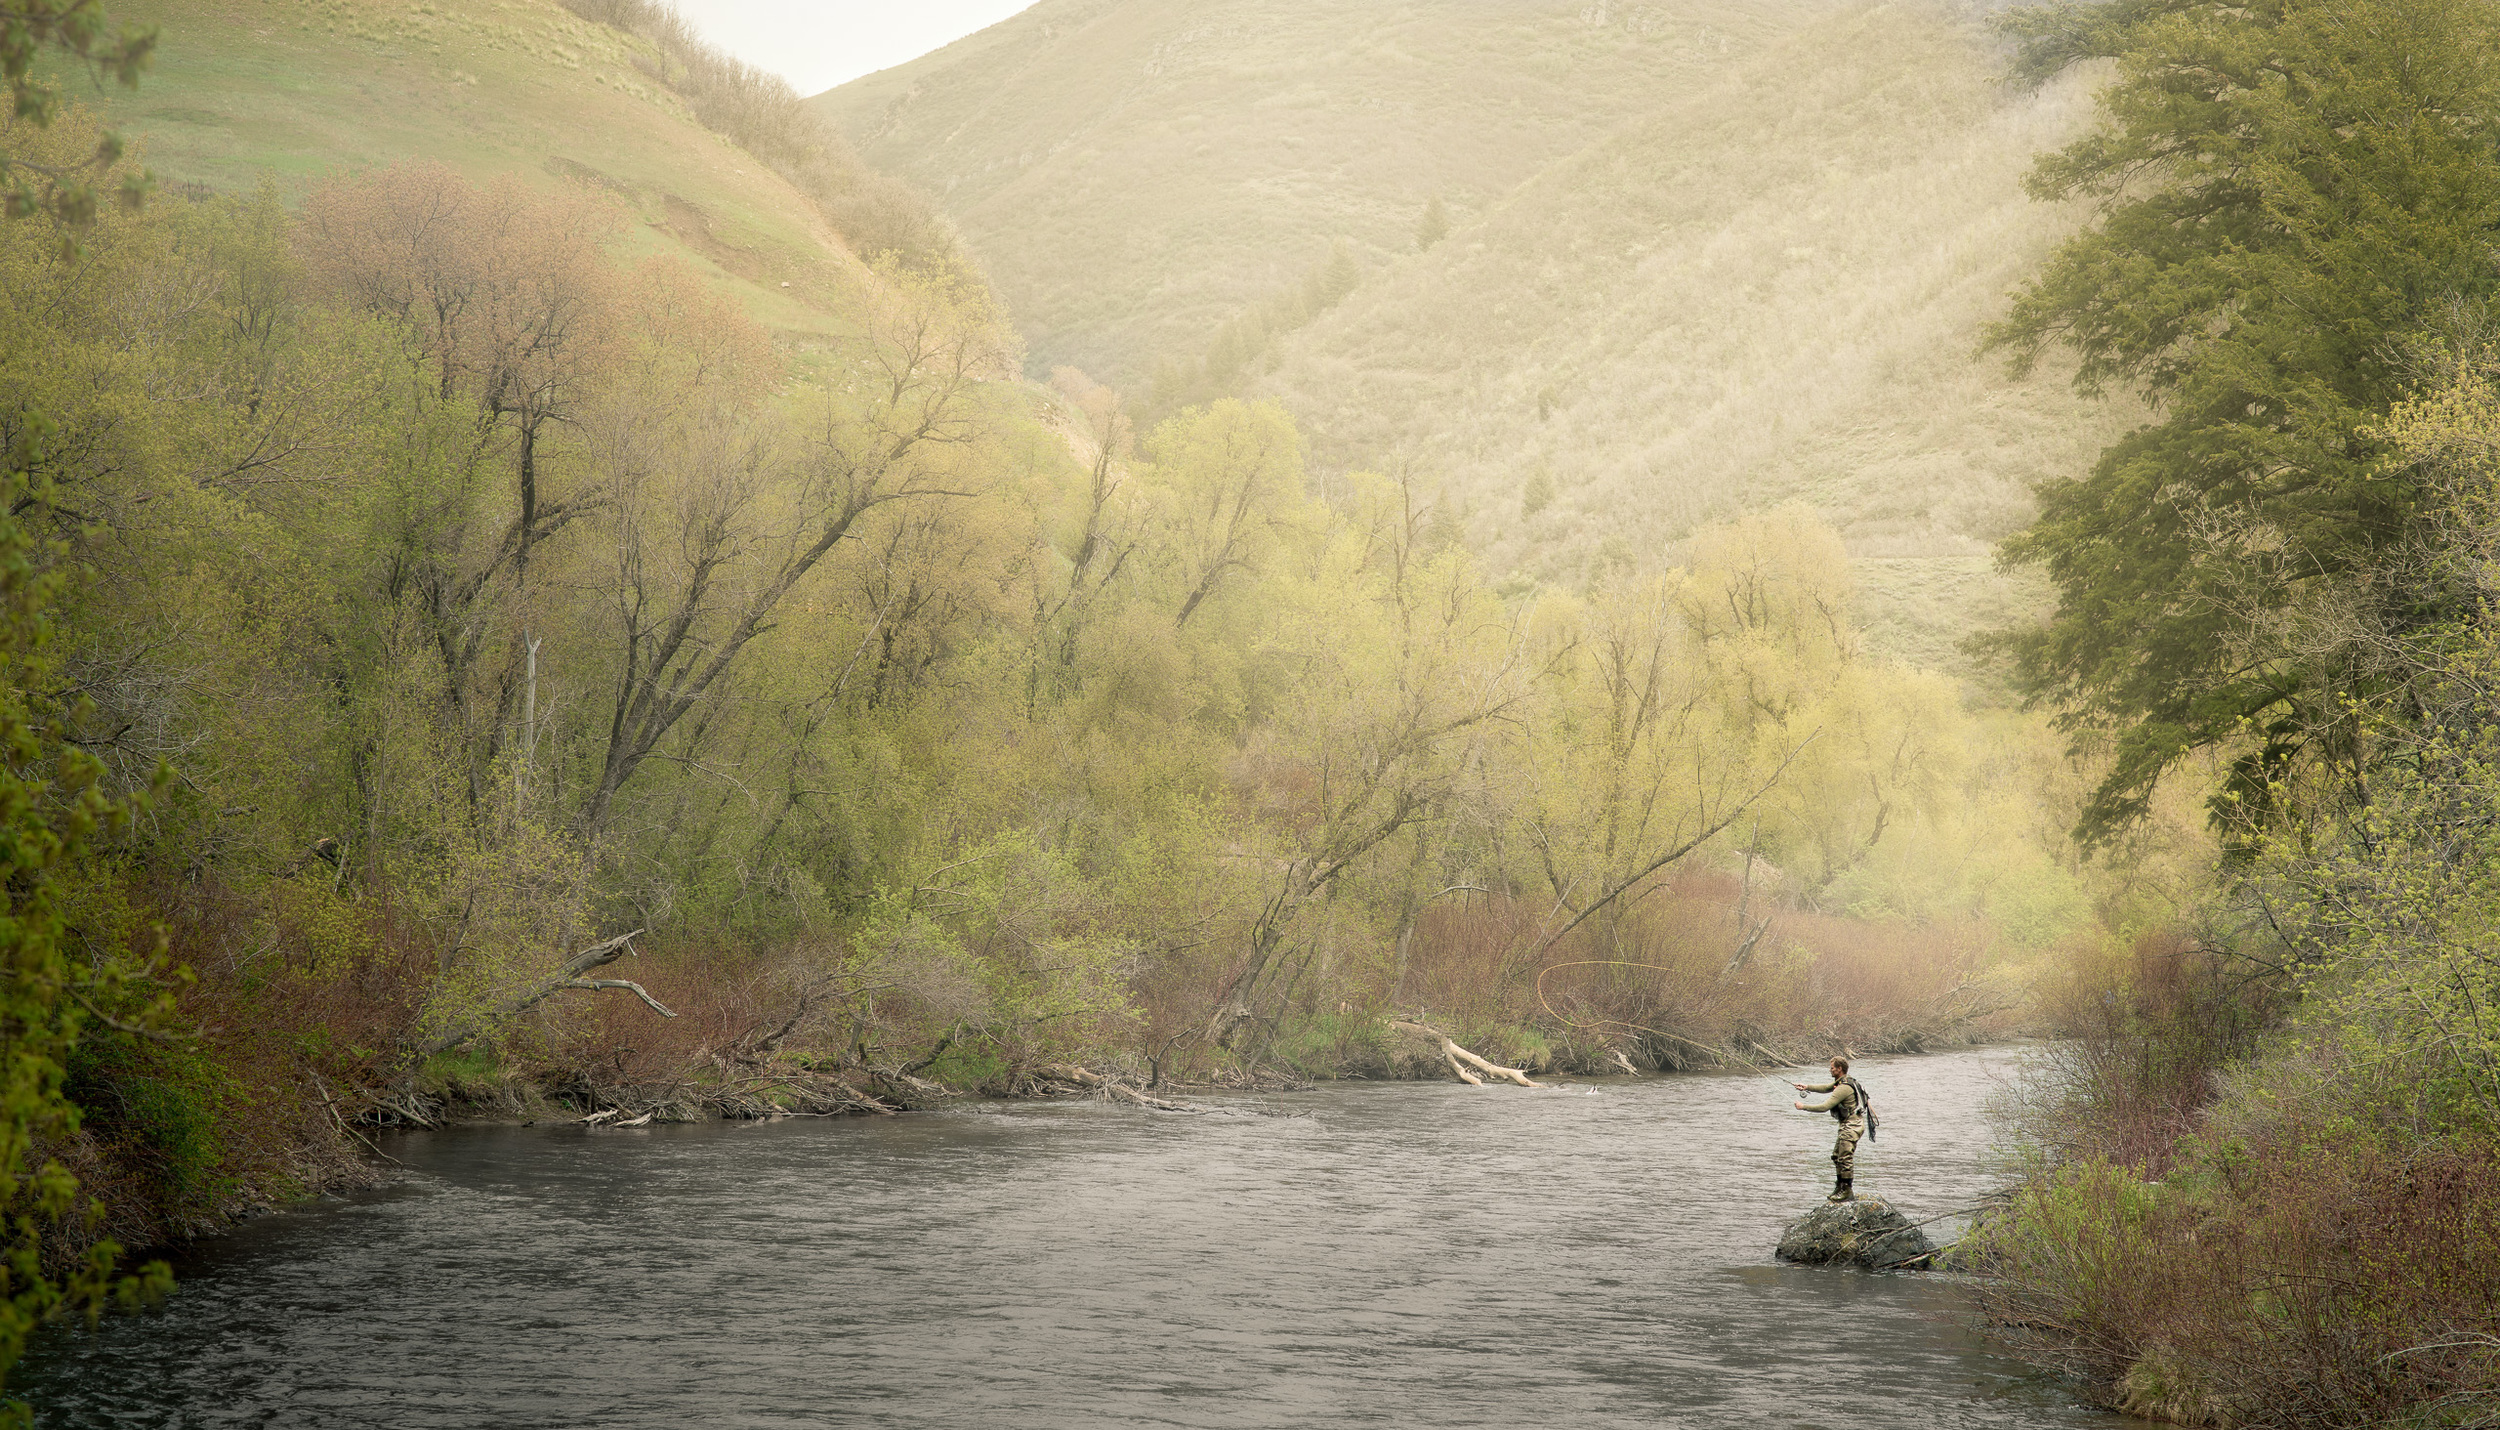 Fly fishing on the provo river